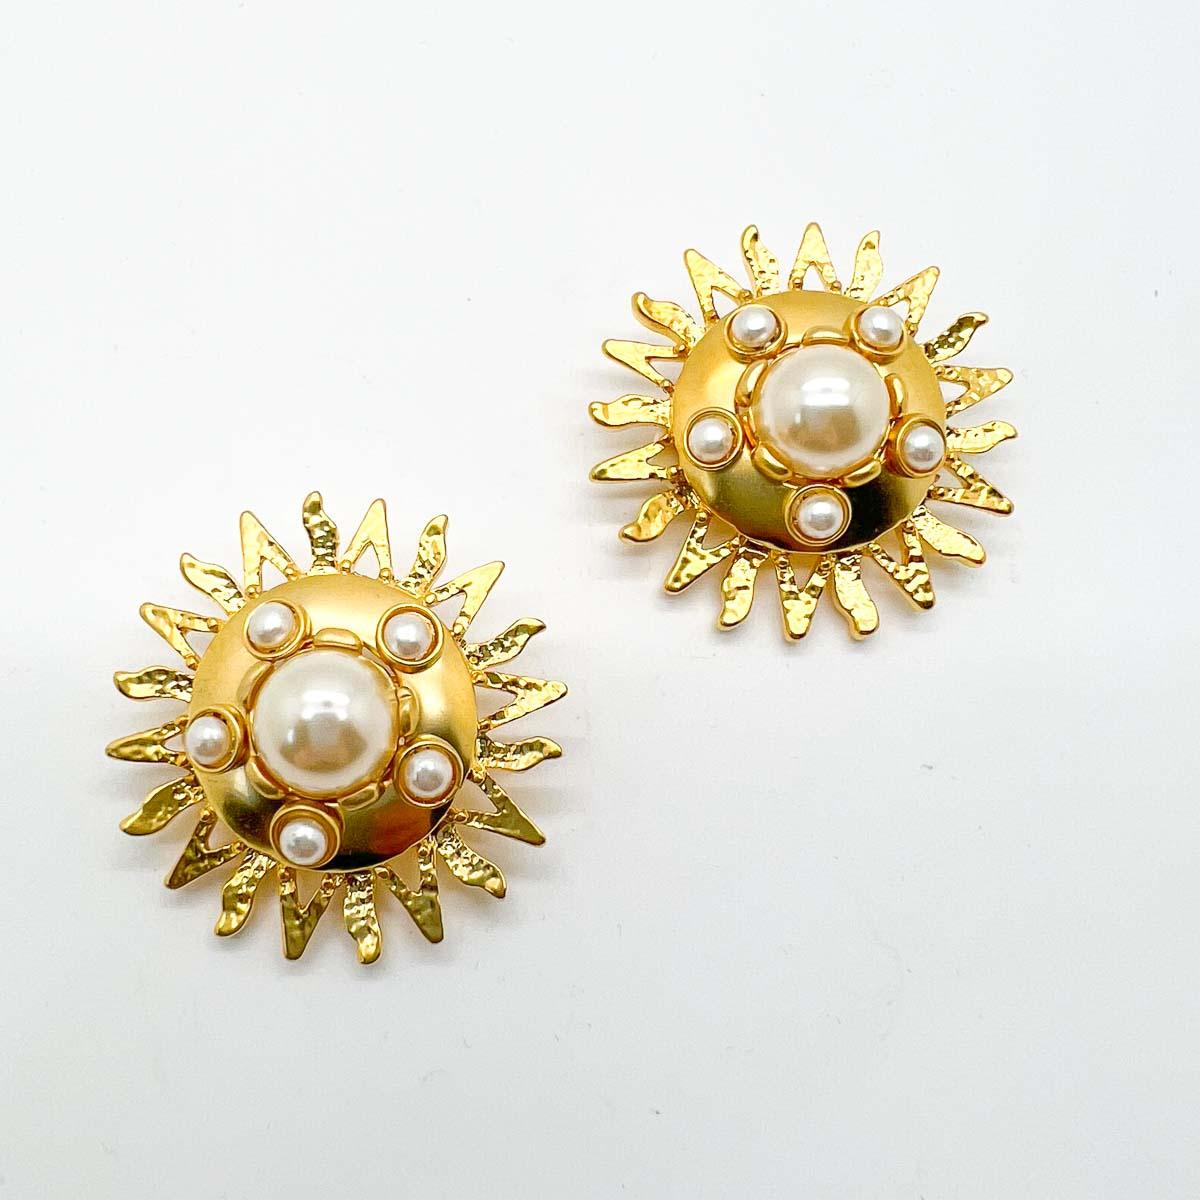 A stunning pair of Vintage Pearl Starburst Earrings. A large lustrous gilded starburst is adorned with timeless pearls. A mesmerising style statement.

An unsigned beauty. A rare treasure. Just because a jewel doesn’t carry a designer name, doesn’t